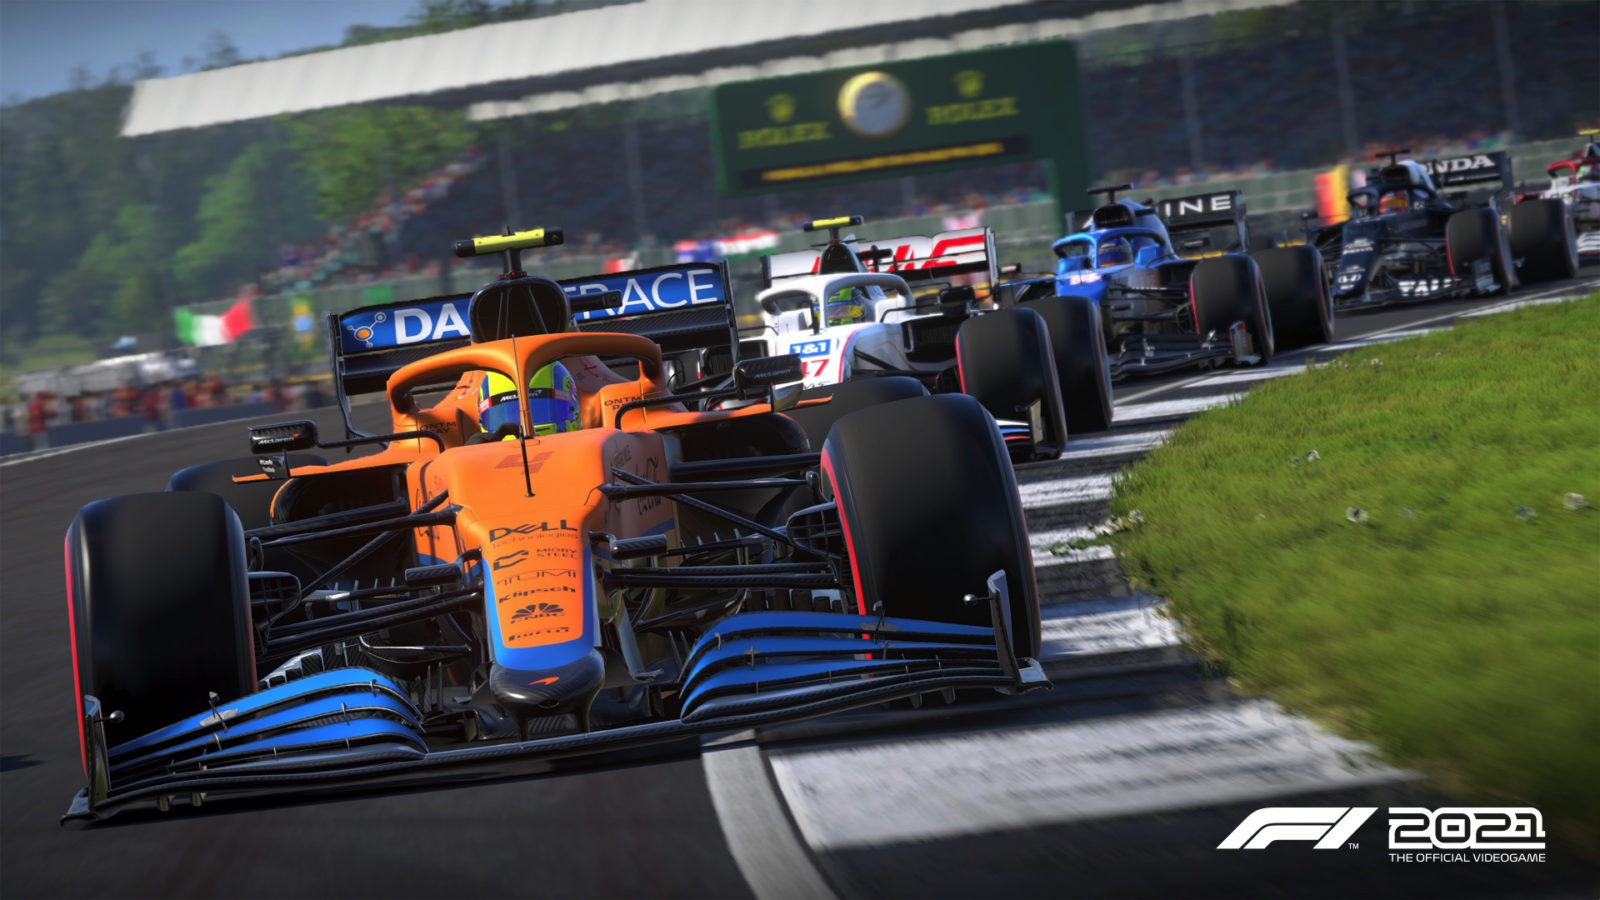 Get loose with the F1 season with this free game